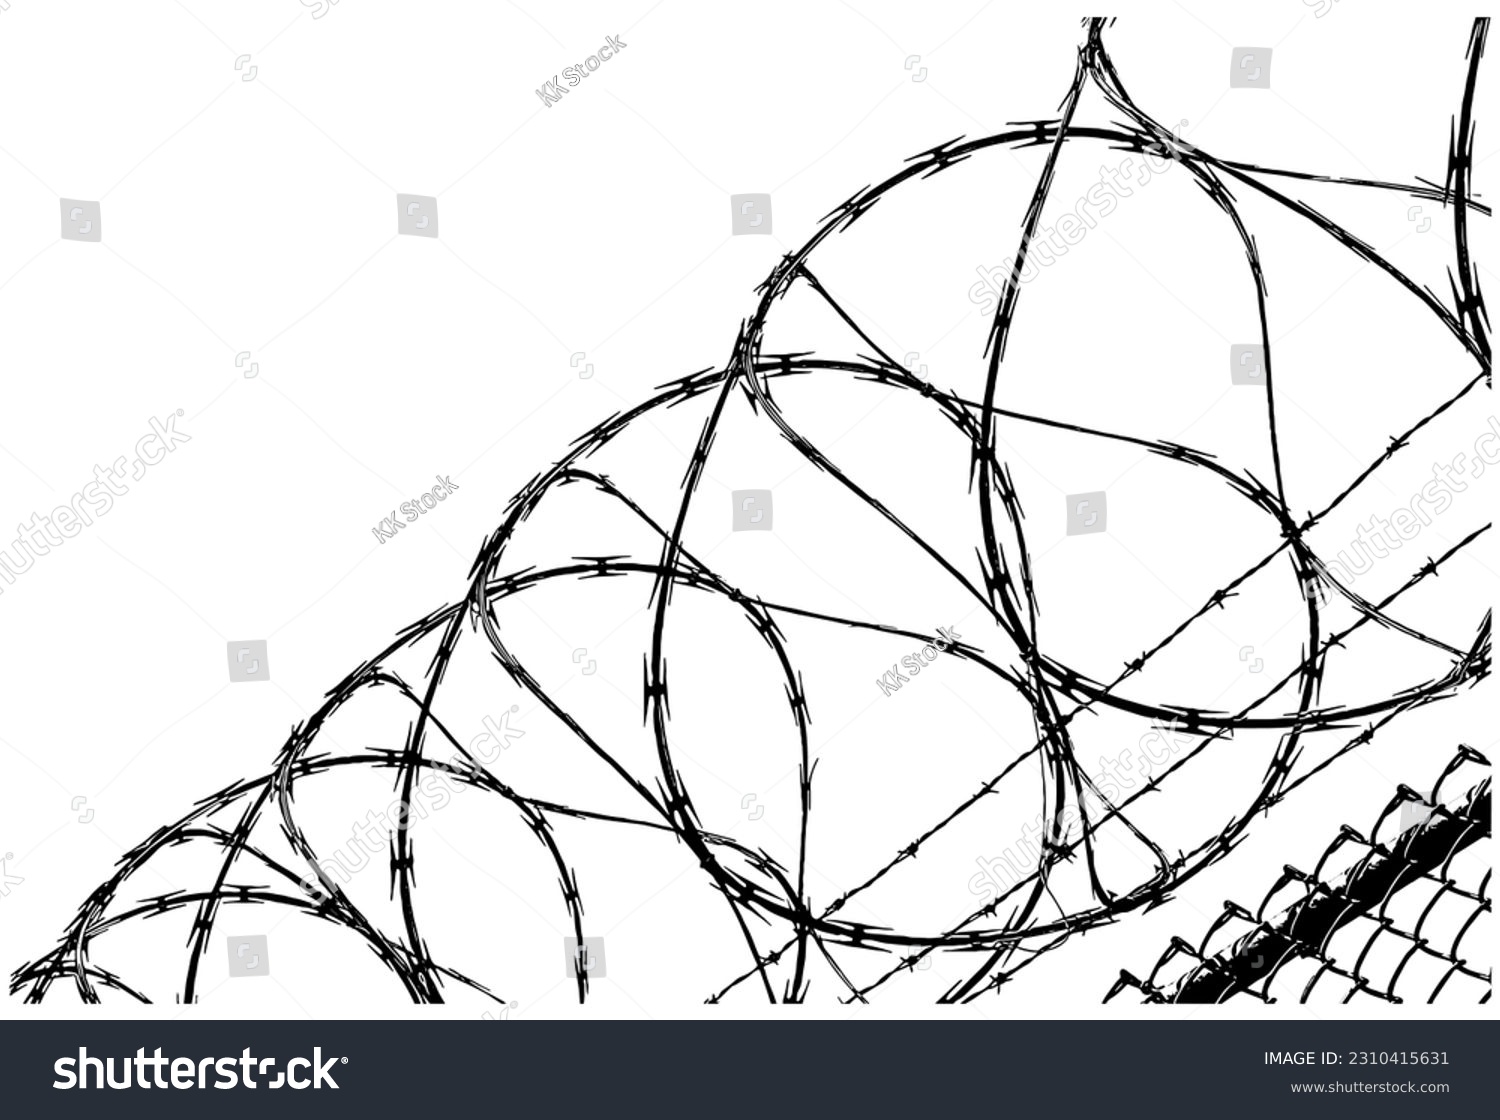 Razor wire over chain linked fence #2310415631